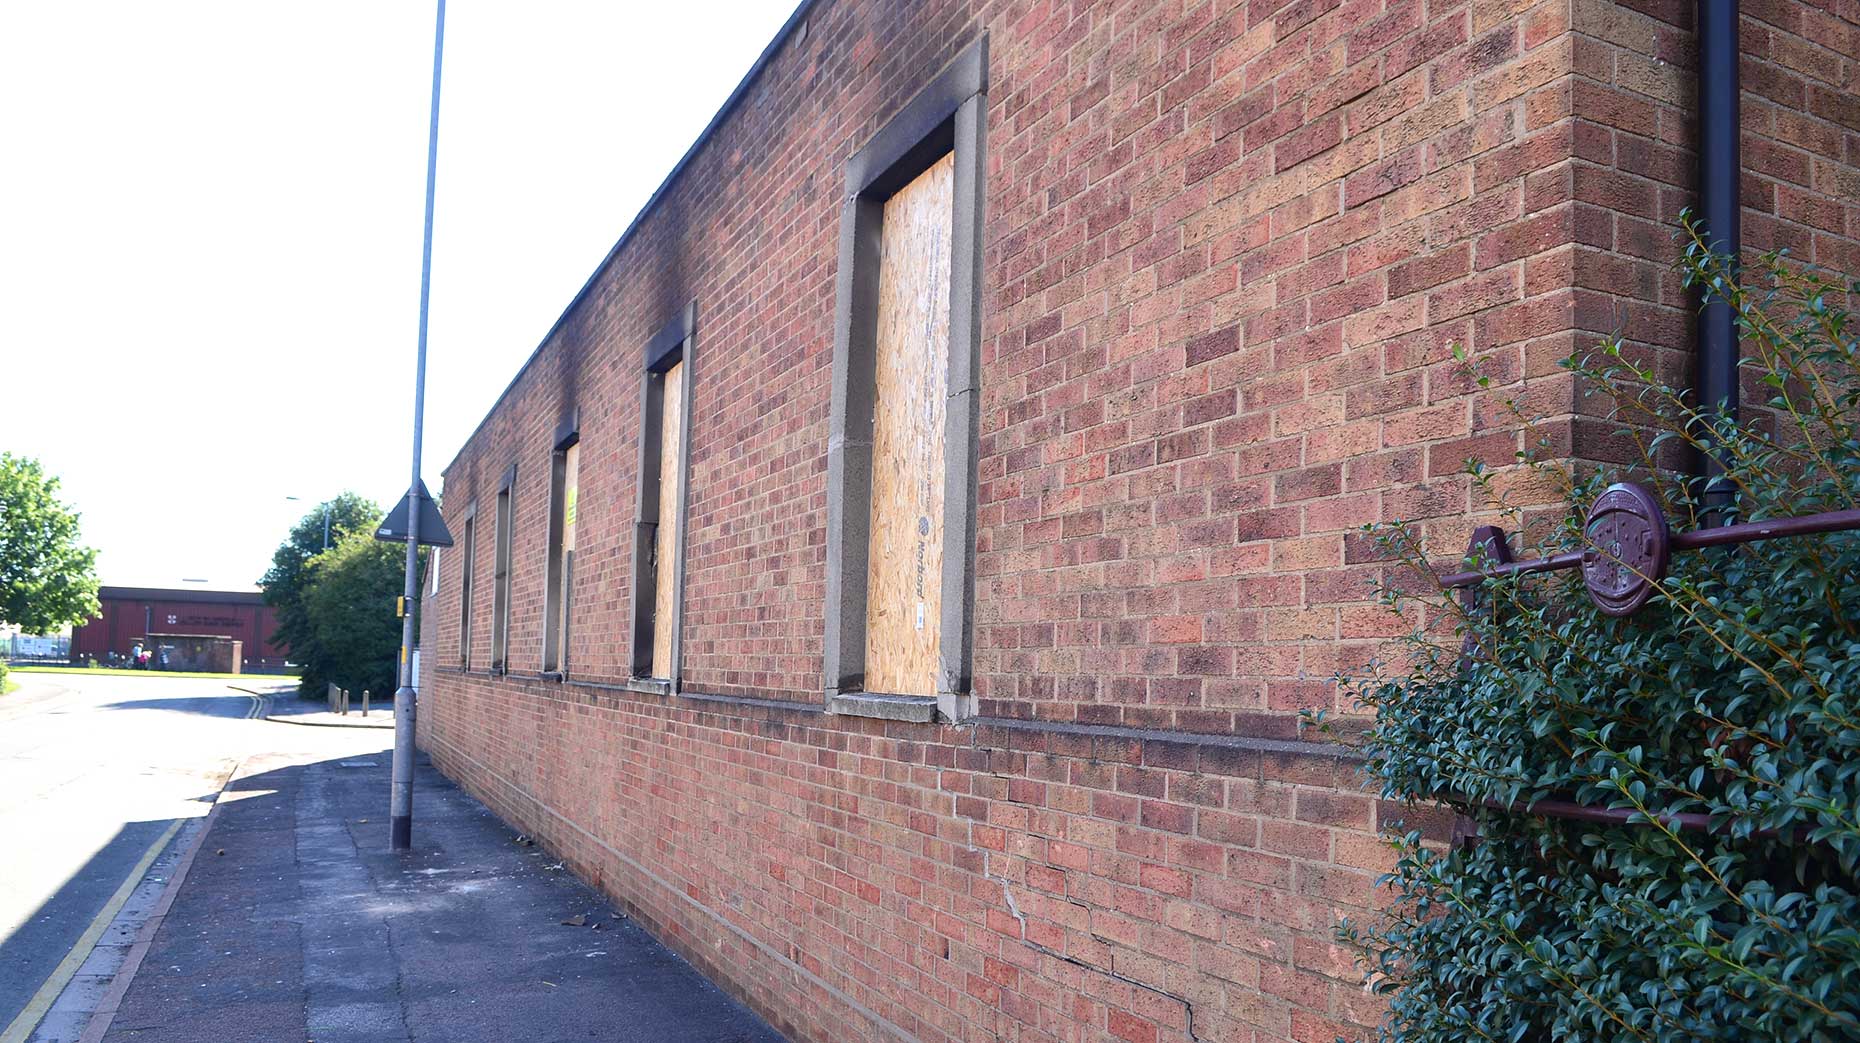 Smoke damage from the fire at the Croft Street community centre in Lincoln. Photo: Steve Smailes for The Lincolnite